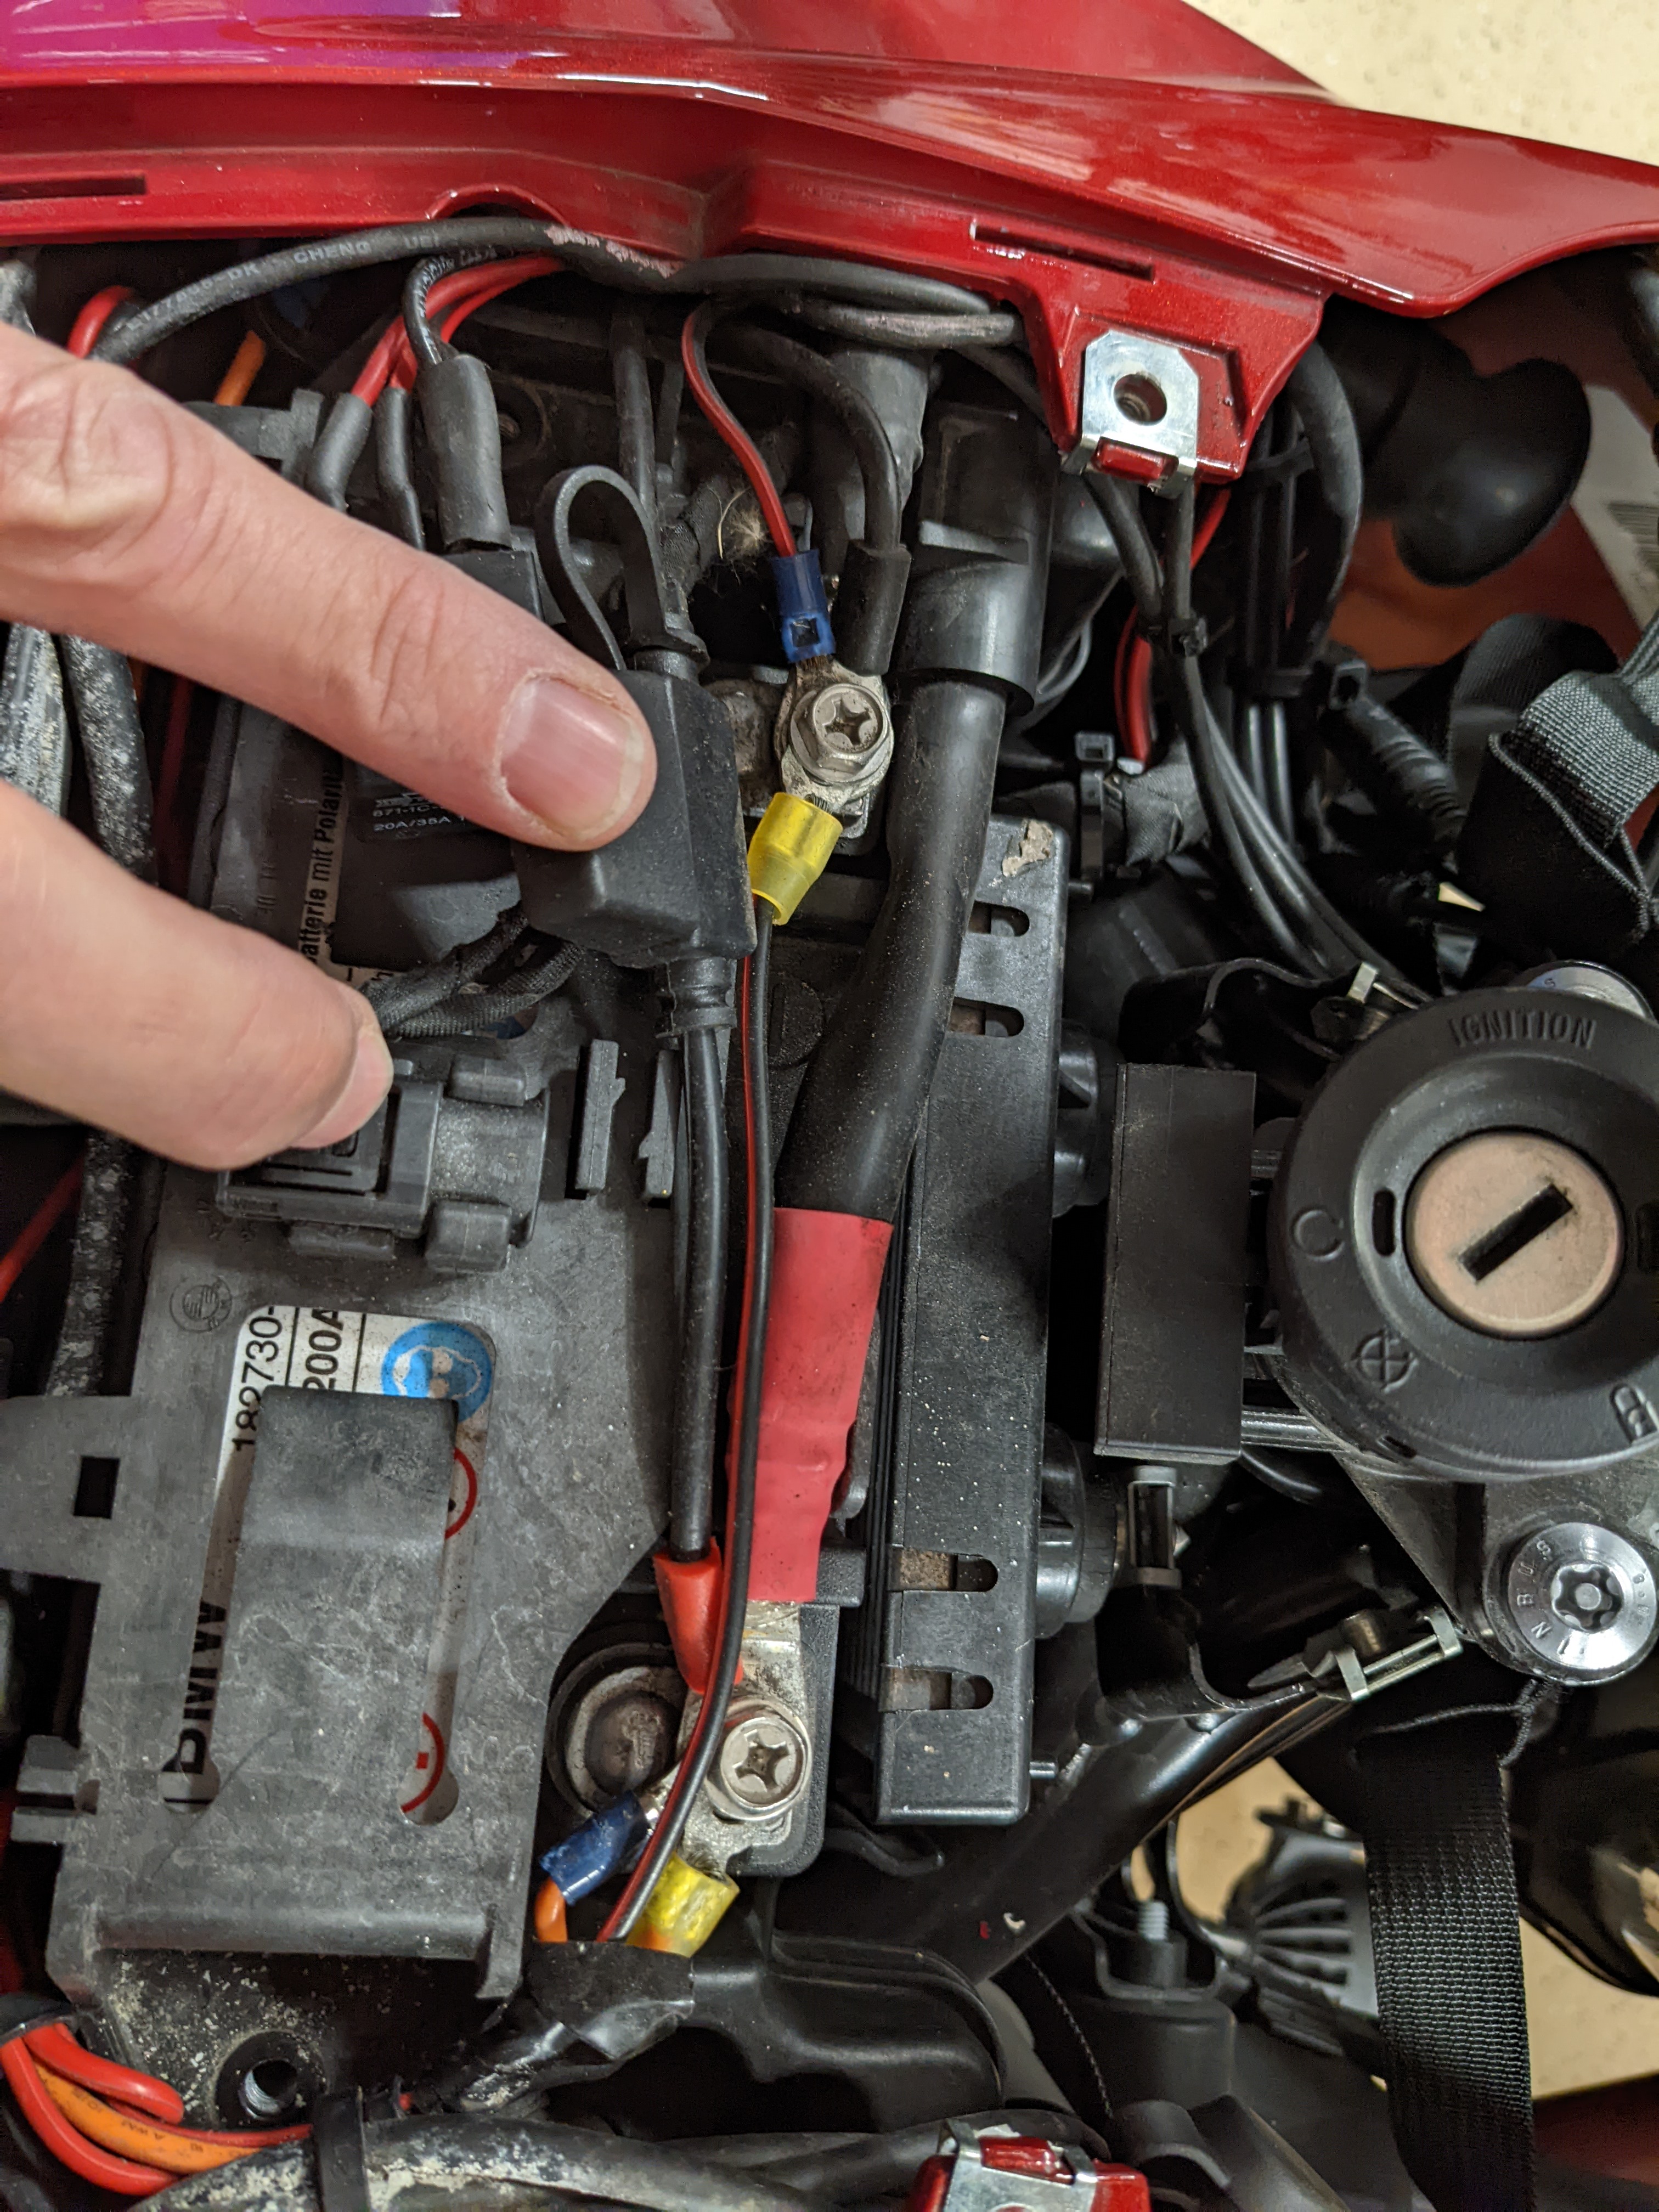 Double checking battery connections